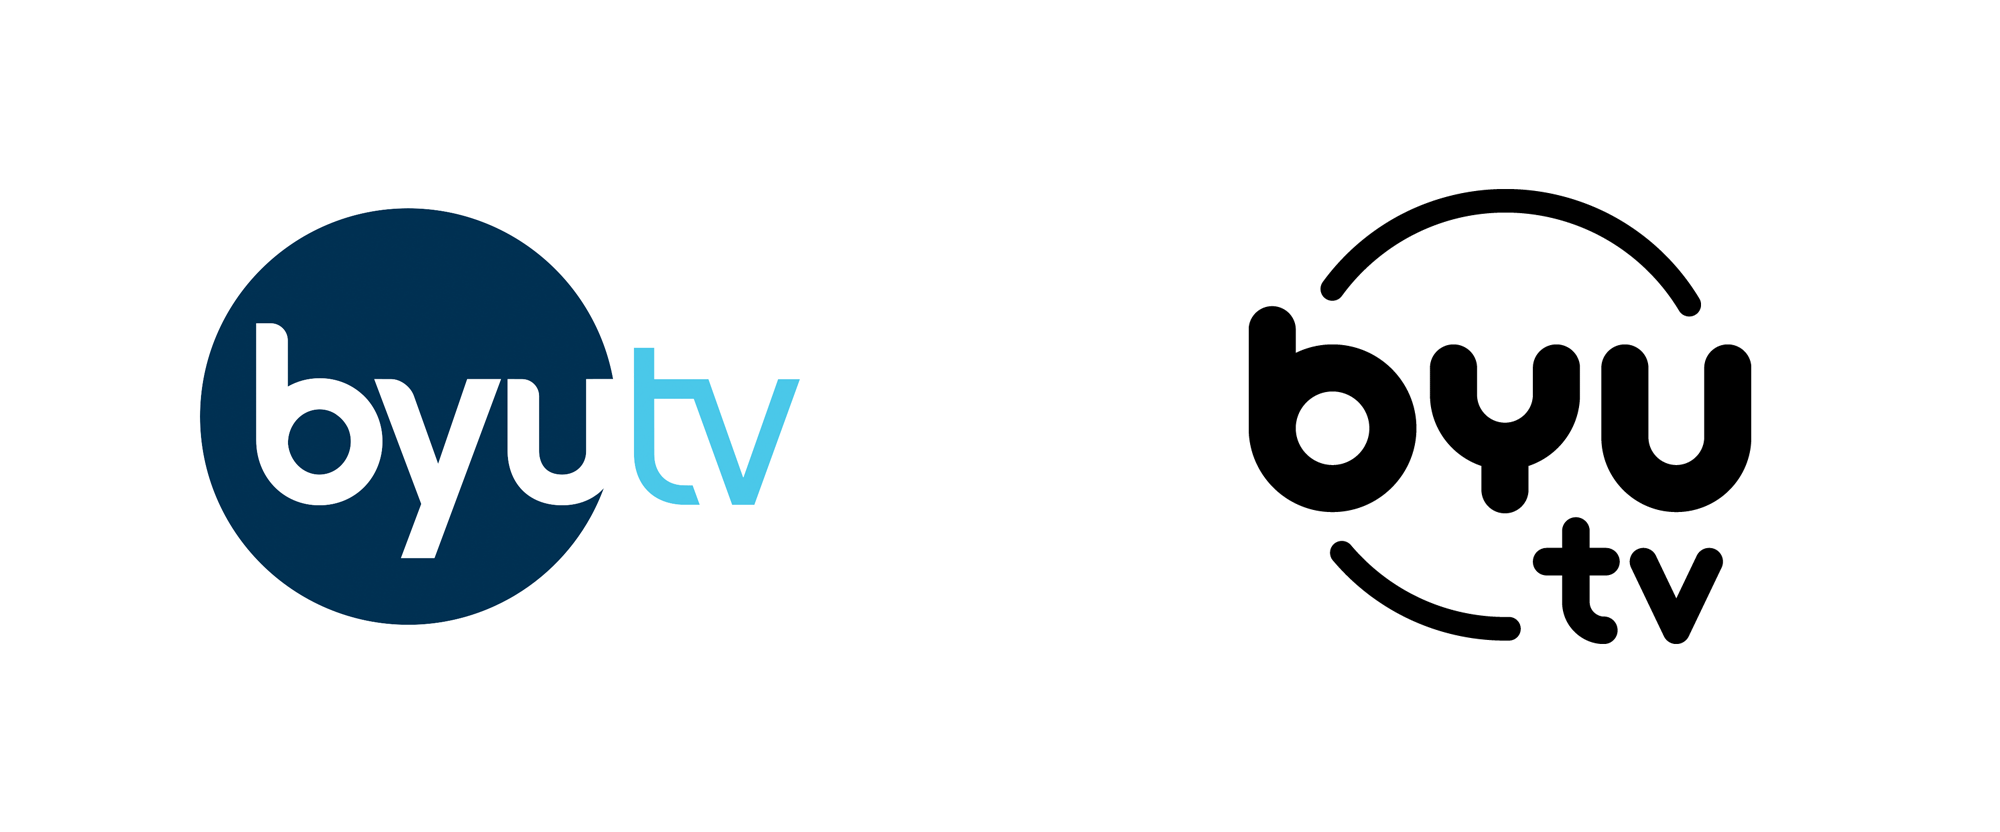 BYUtv Logo - Brand New: New Logo and On-air Look for BYUtv by Troika